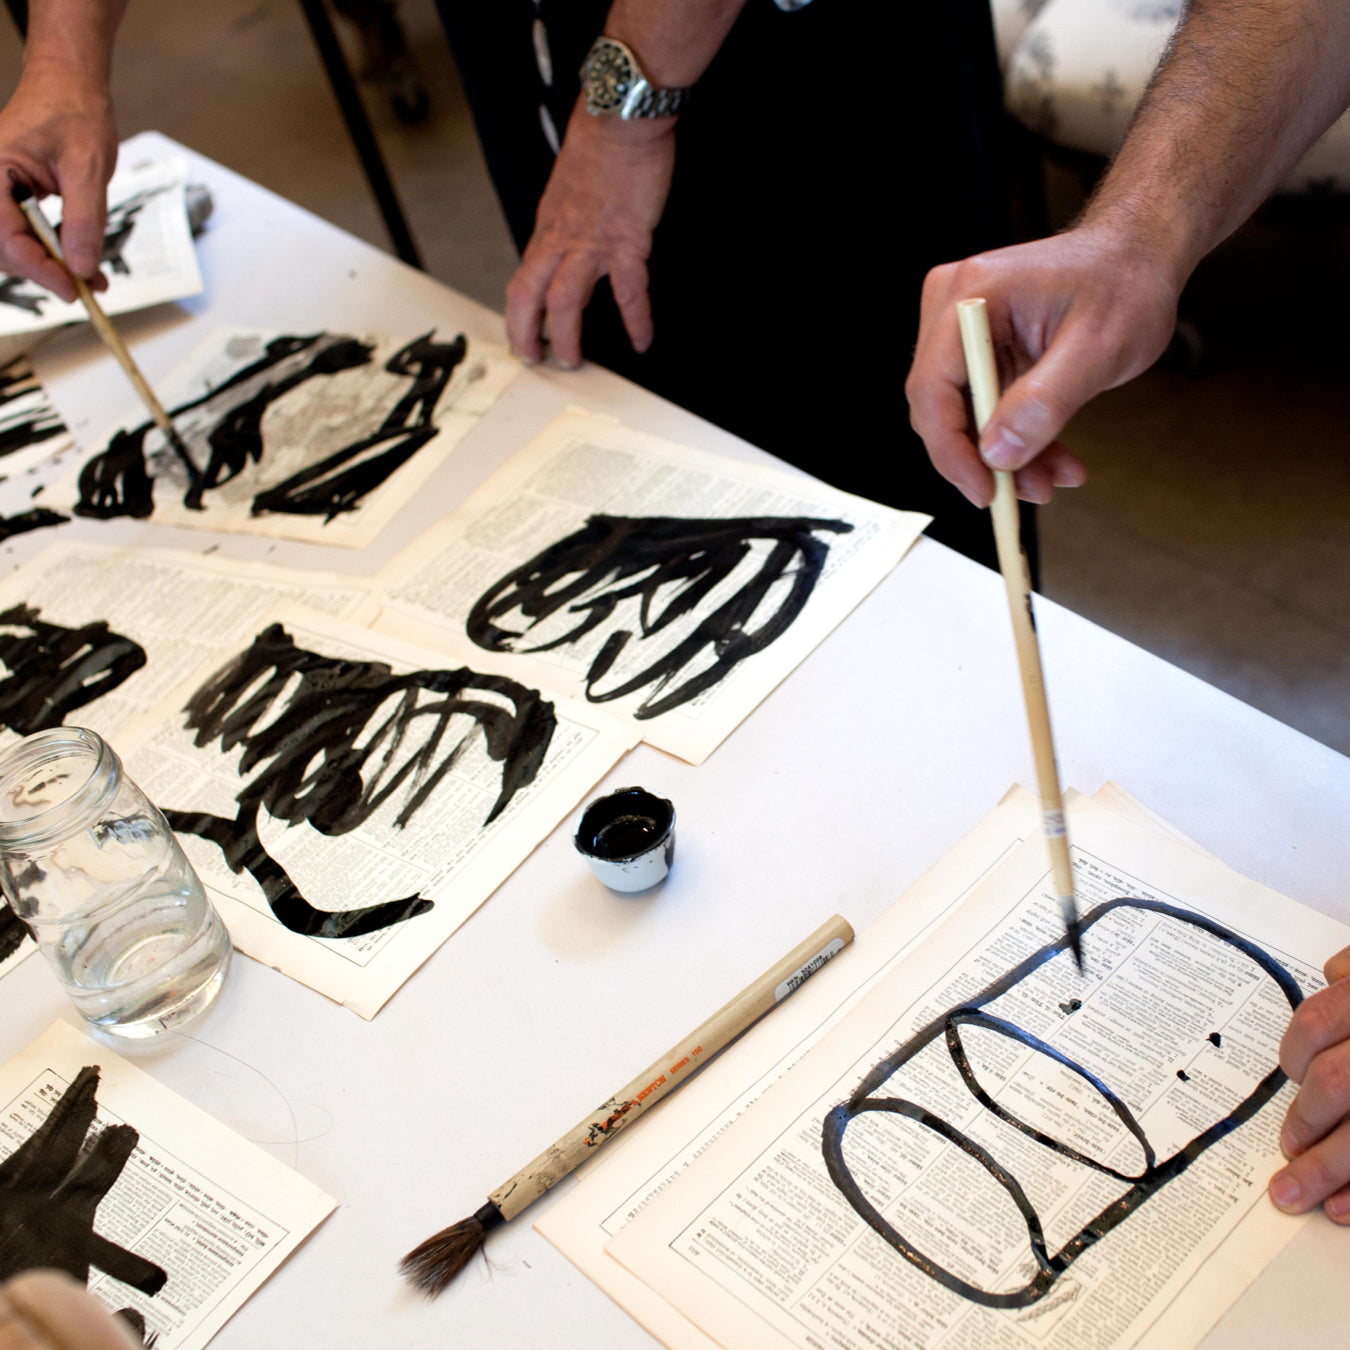 Participants in the Rolex Mentor and Protégé Arts Initiative Collaborate on an Art Piece